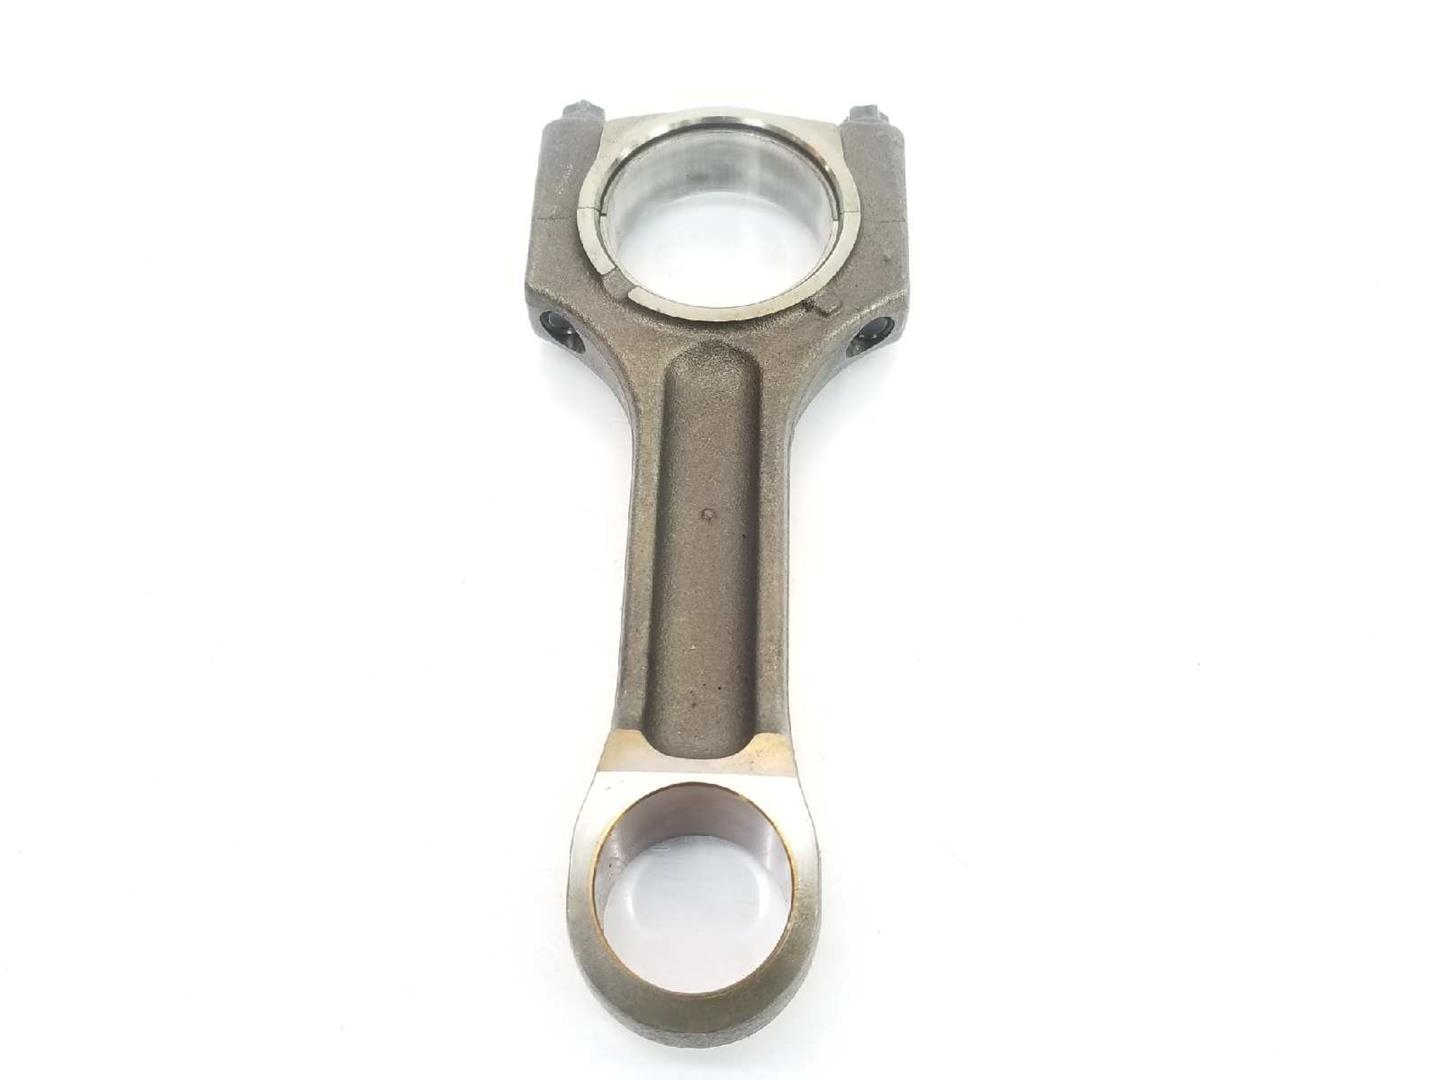 BMW X3 E83 (2003-2010) Connecting Rod 11247798368, 11247798368 19726866